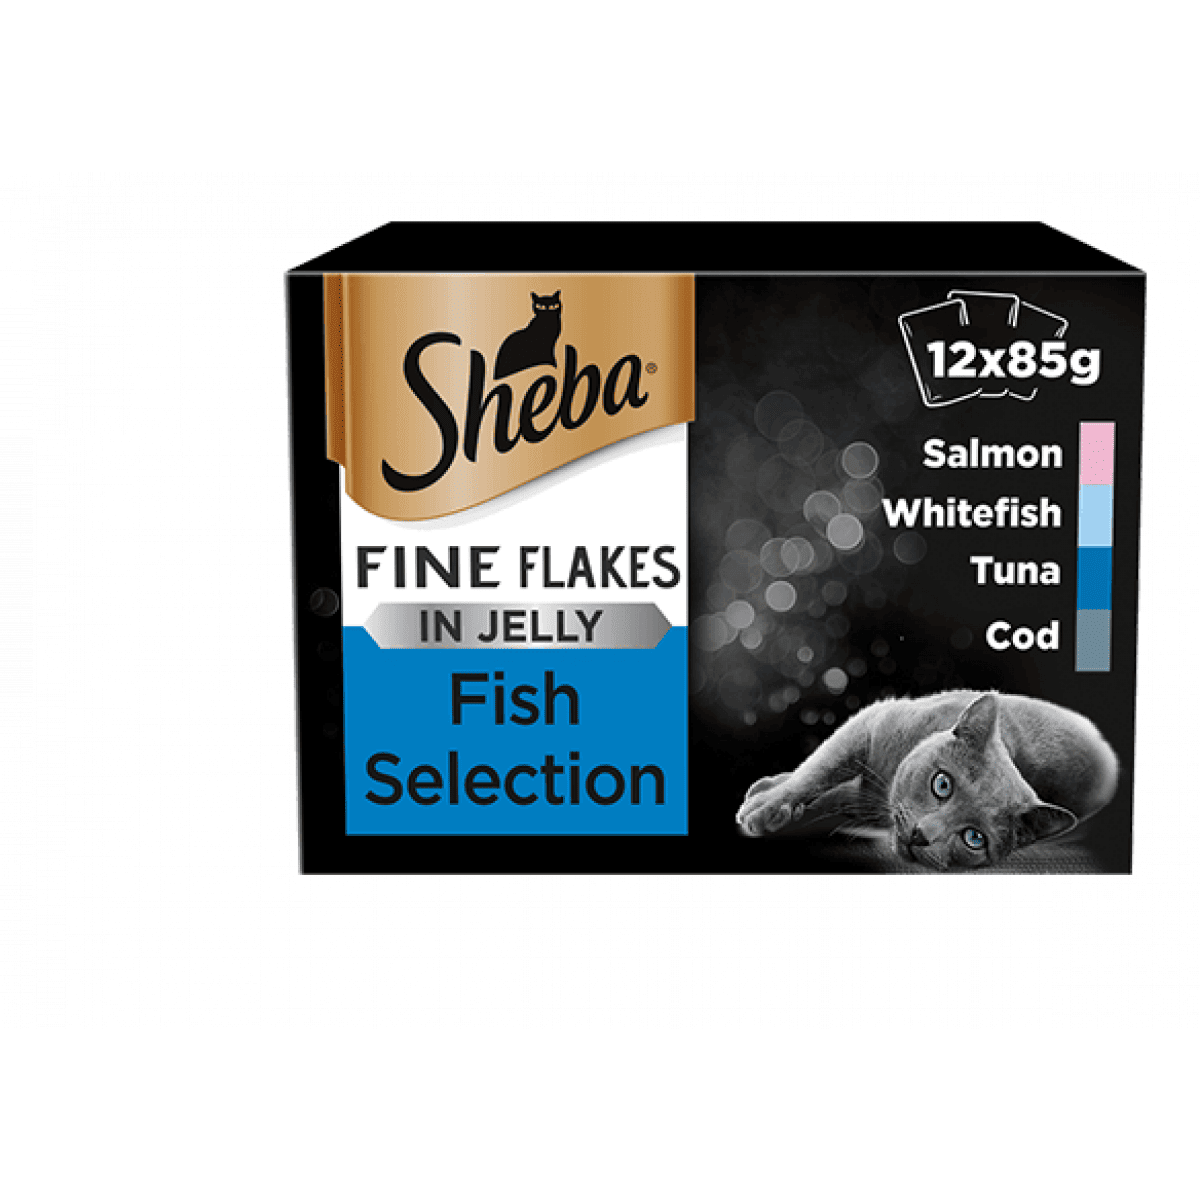 Sheba FF Fish Selection in Jelly 12 x 85g Product Image